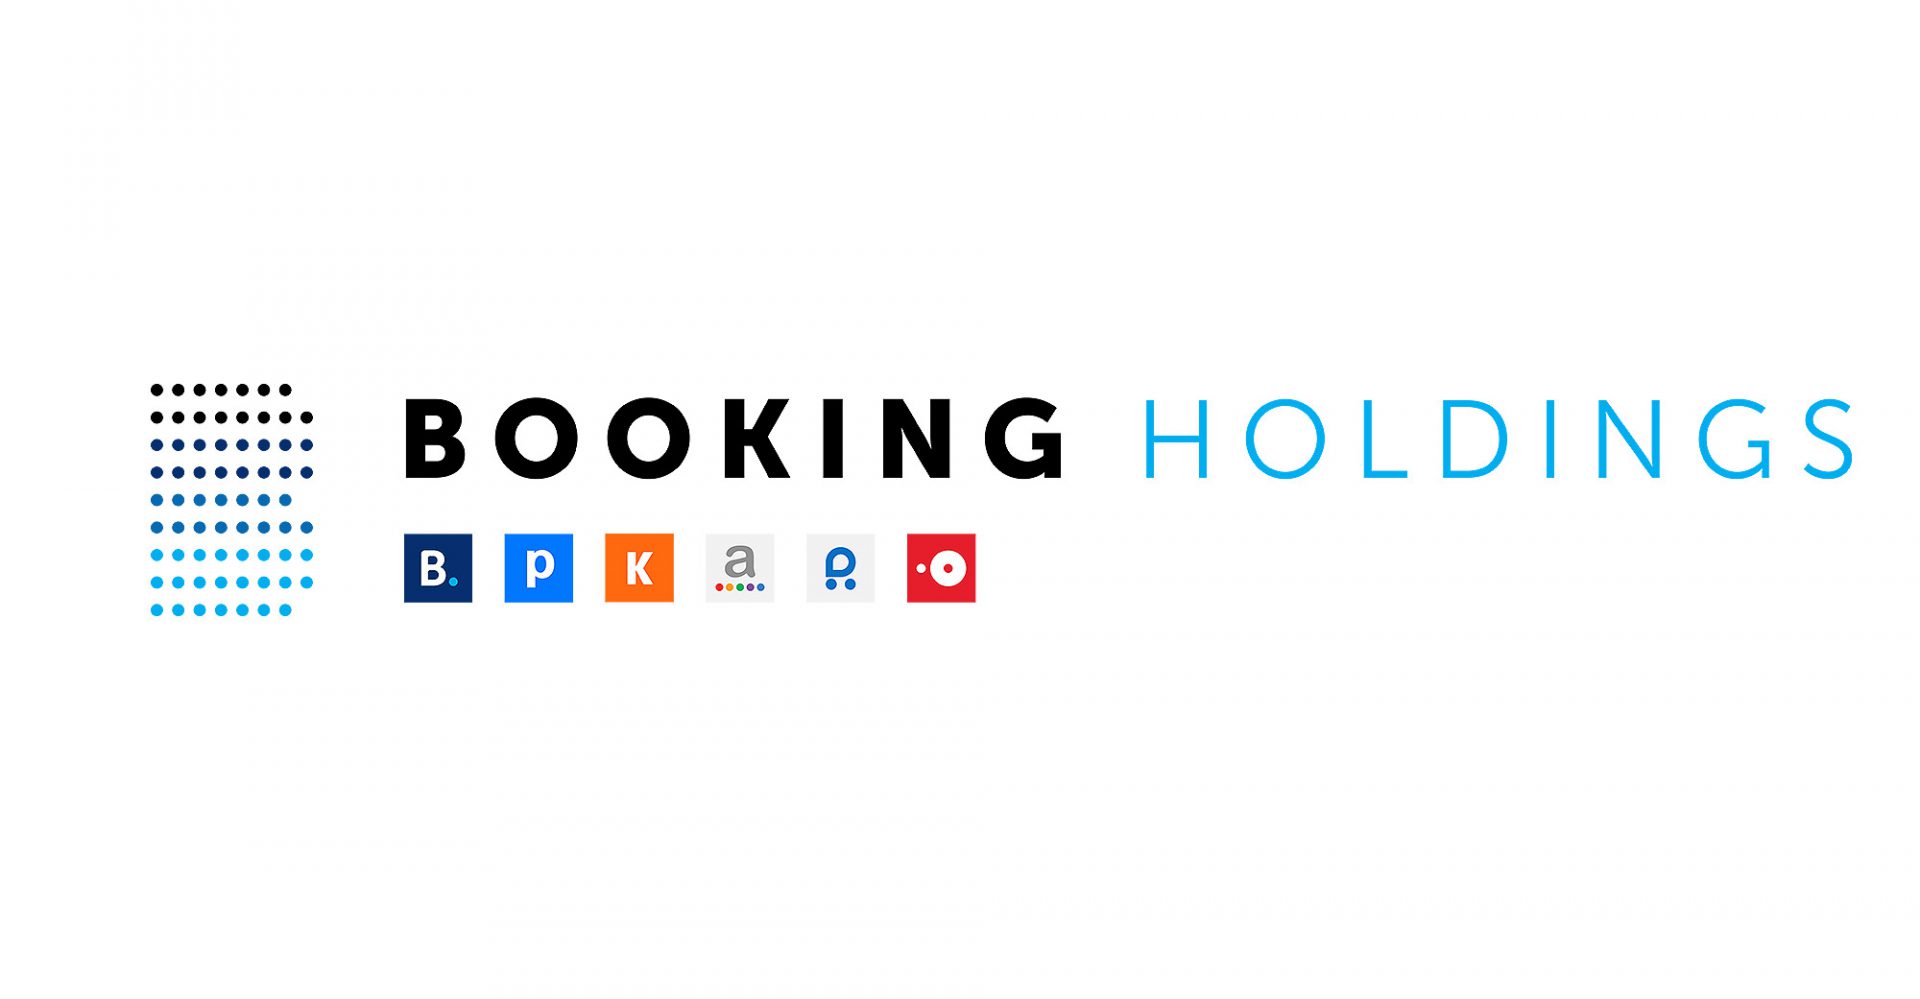 Booking holding. Booking holdings Inc.. BKNG booking holdings. Графические компании booking holdings Inc..